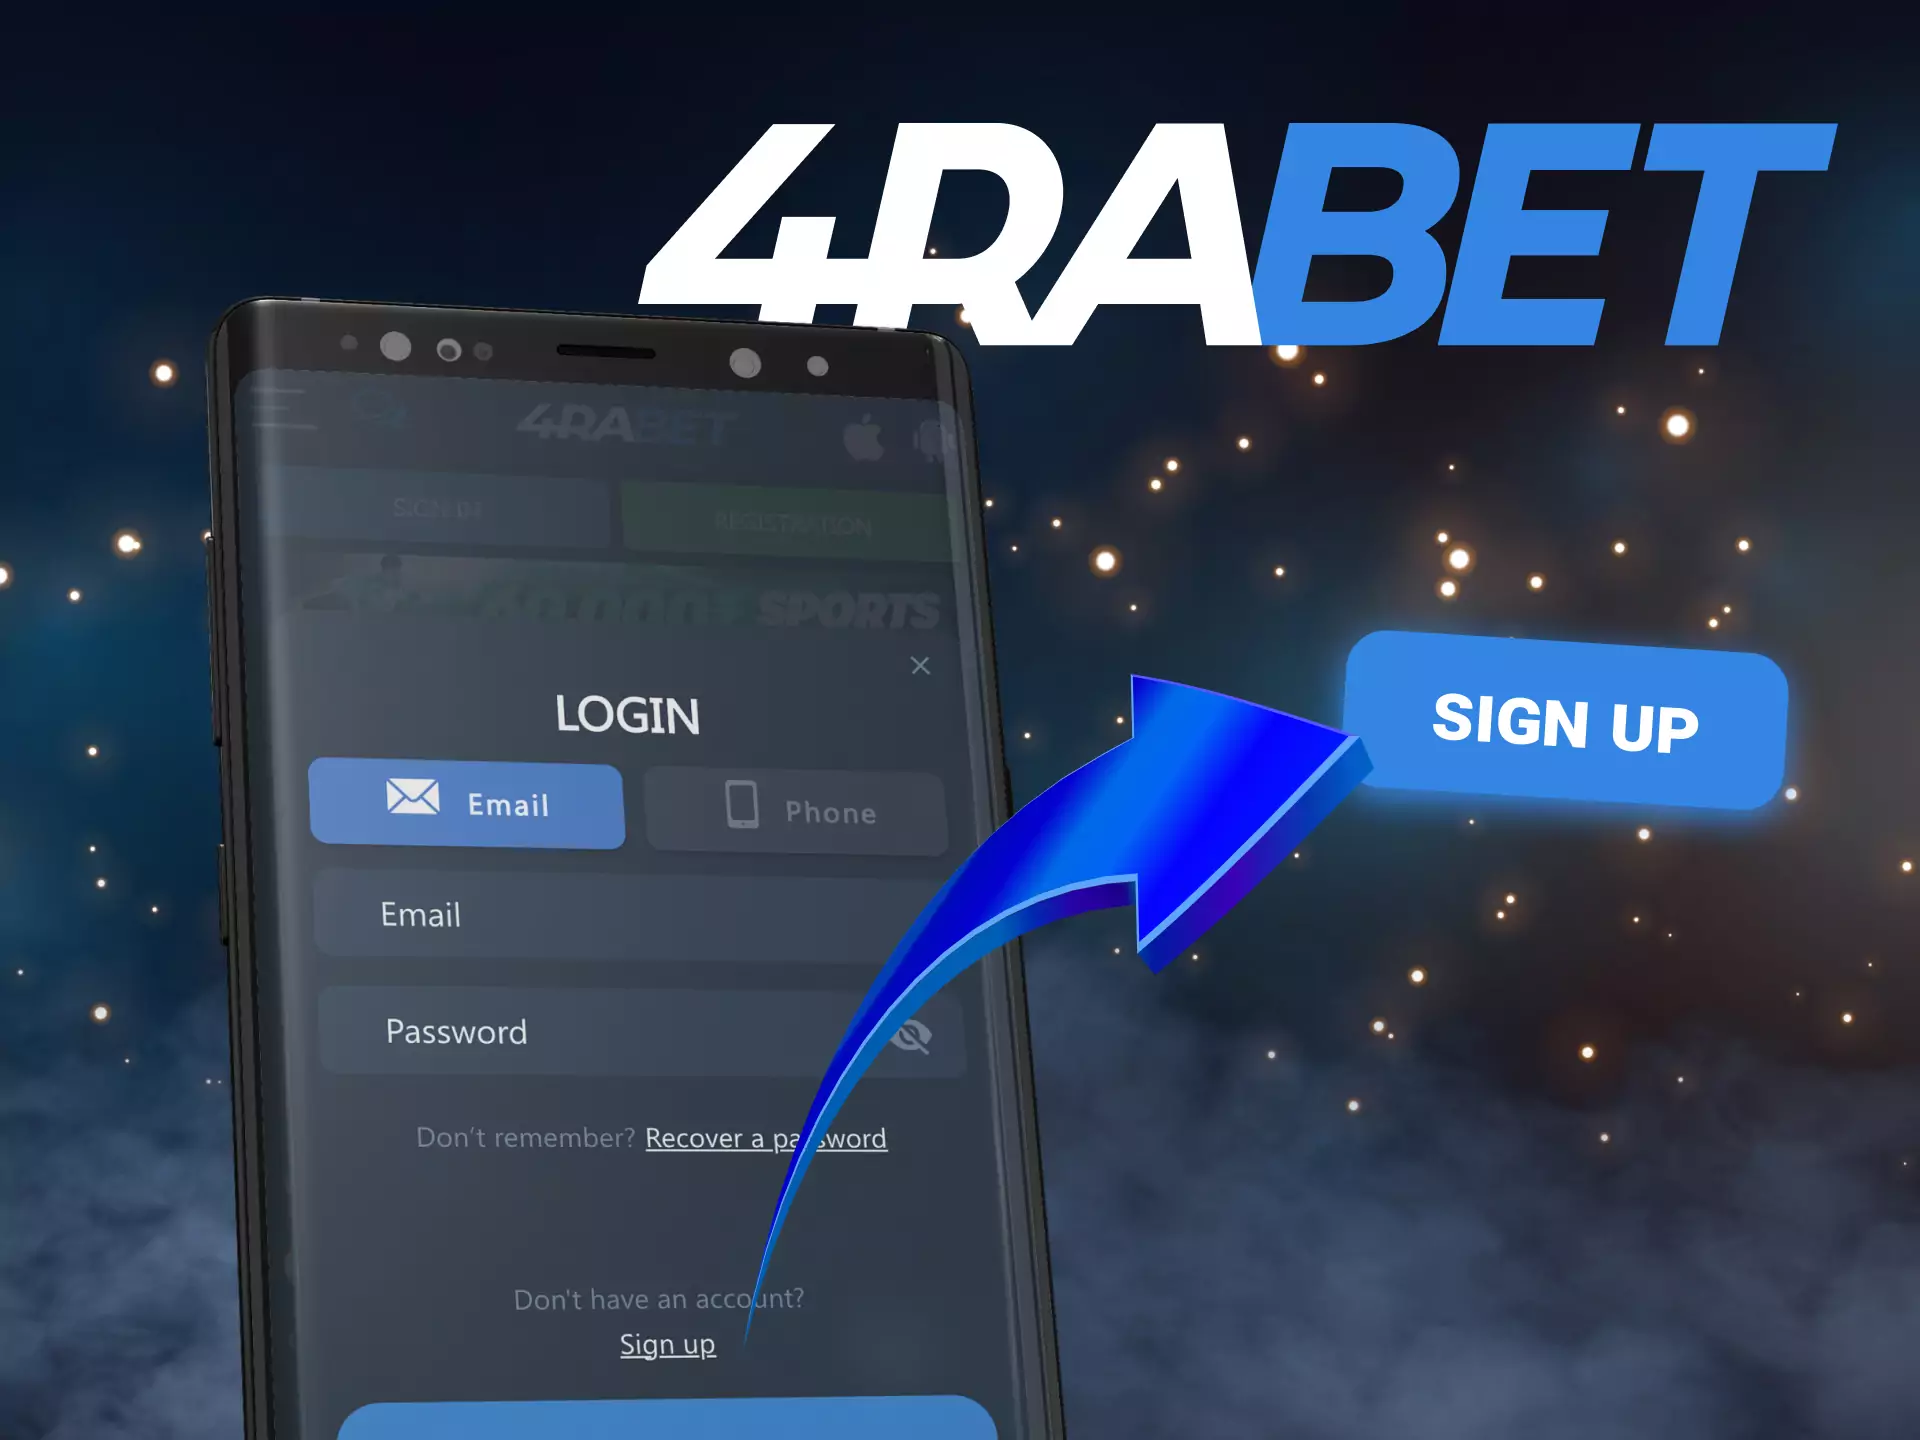 To register in the 4rabet app, click on the sign-up button.